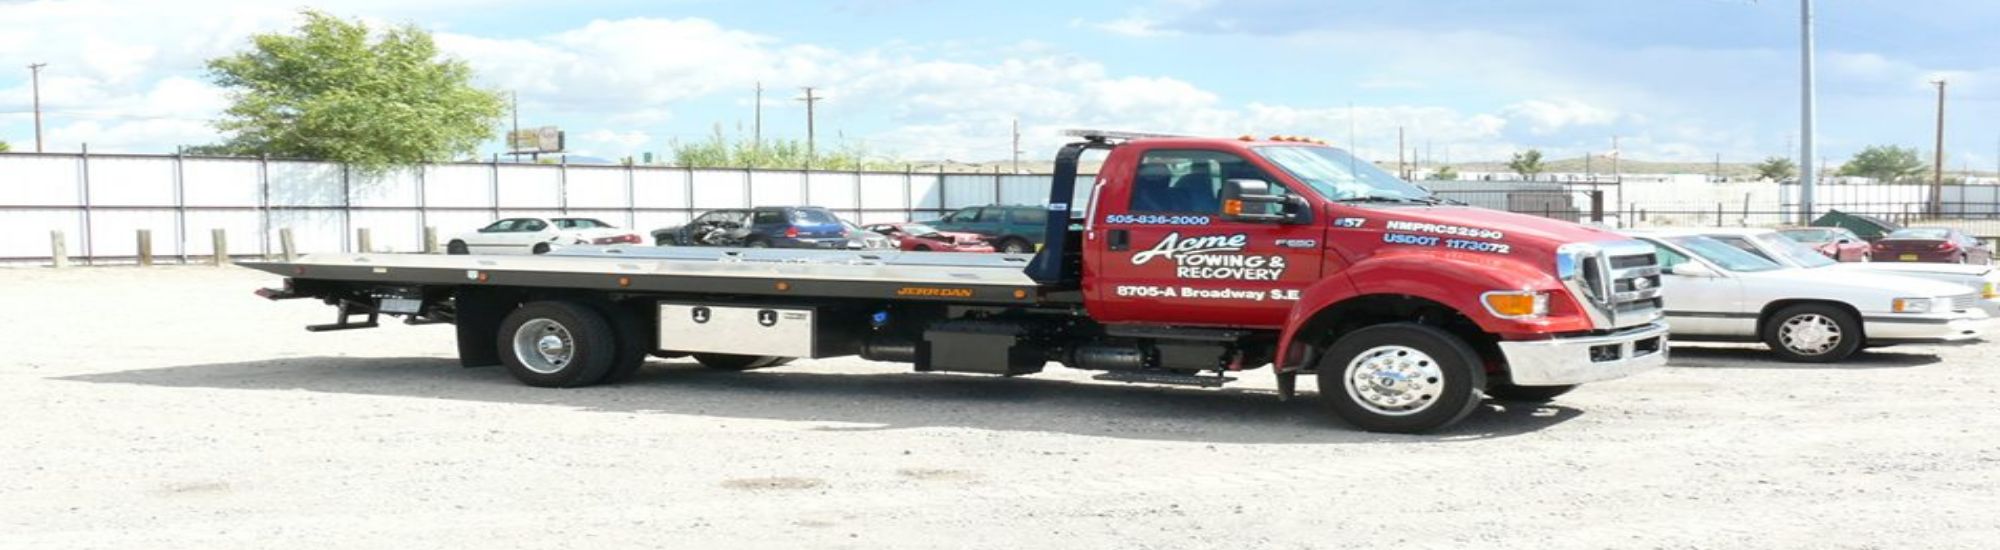 Welcome to Acme Towing & Recovery